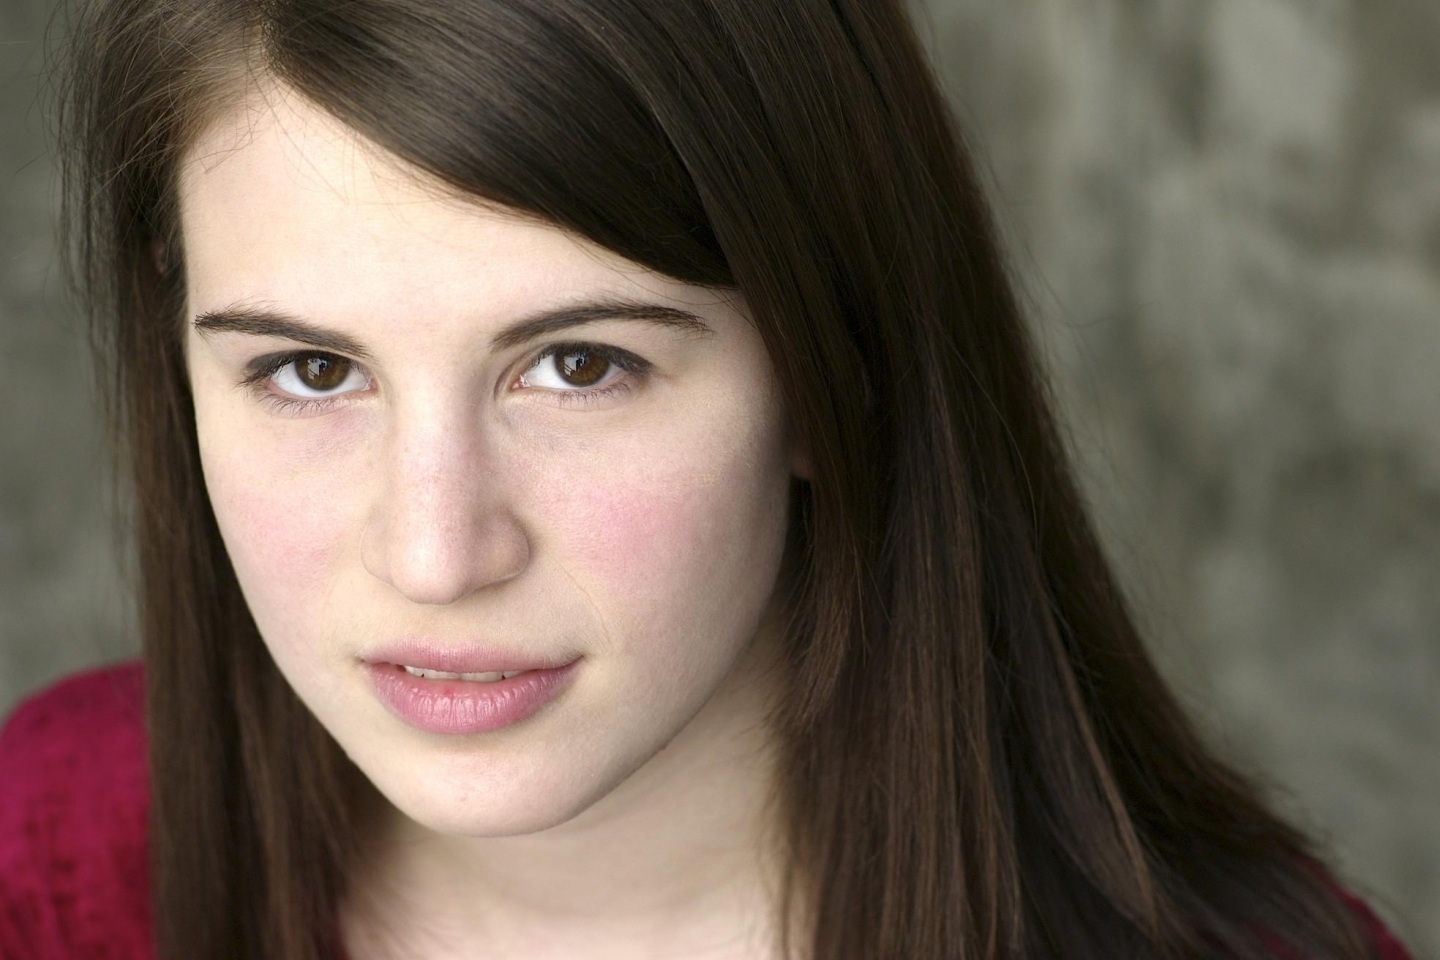 Pictures Of Amelia Rose Blaire Pictures Of Celebrities